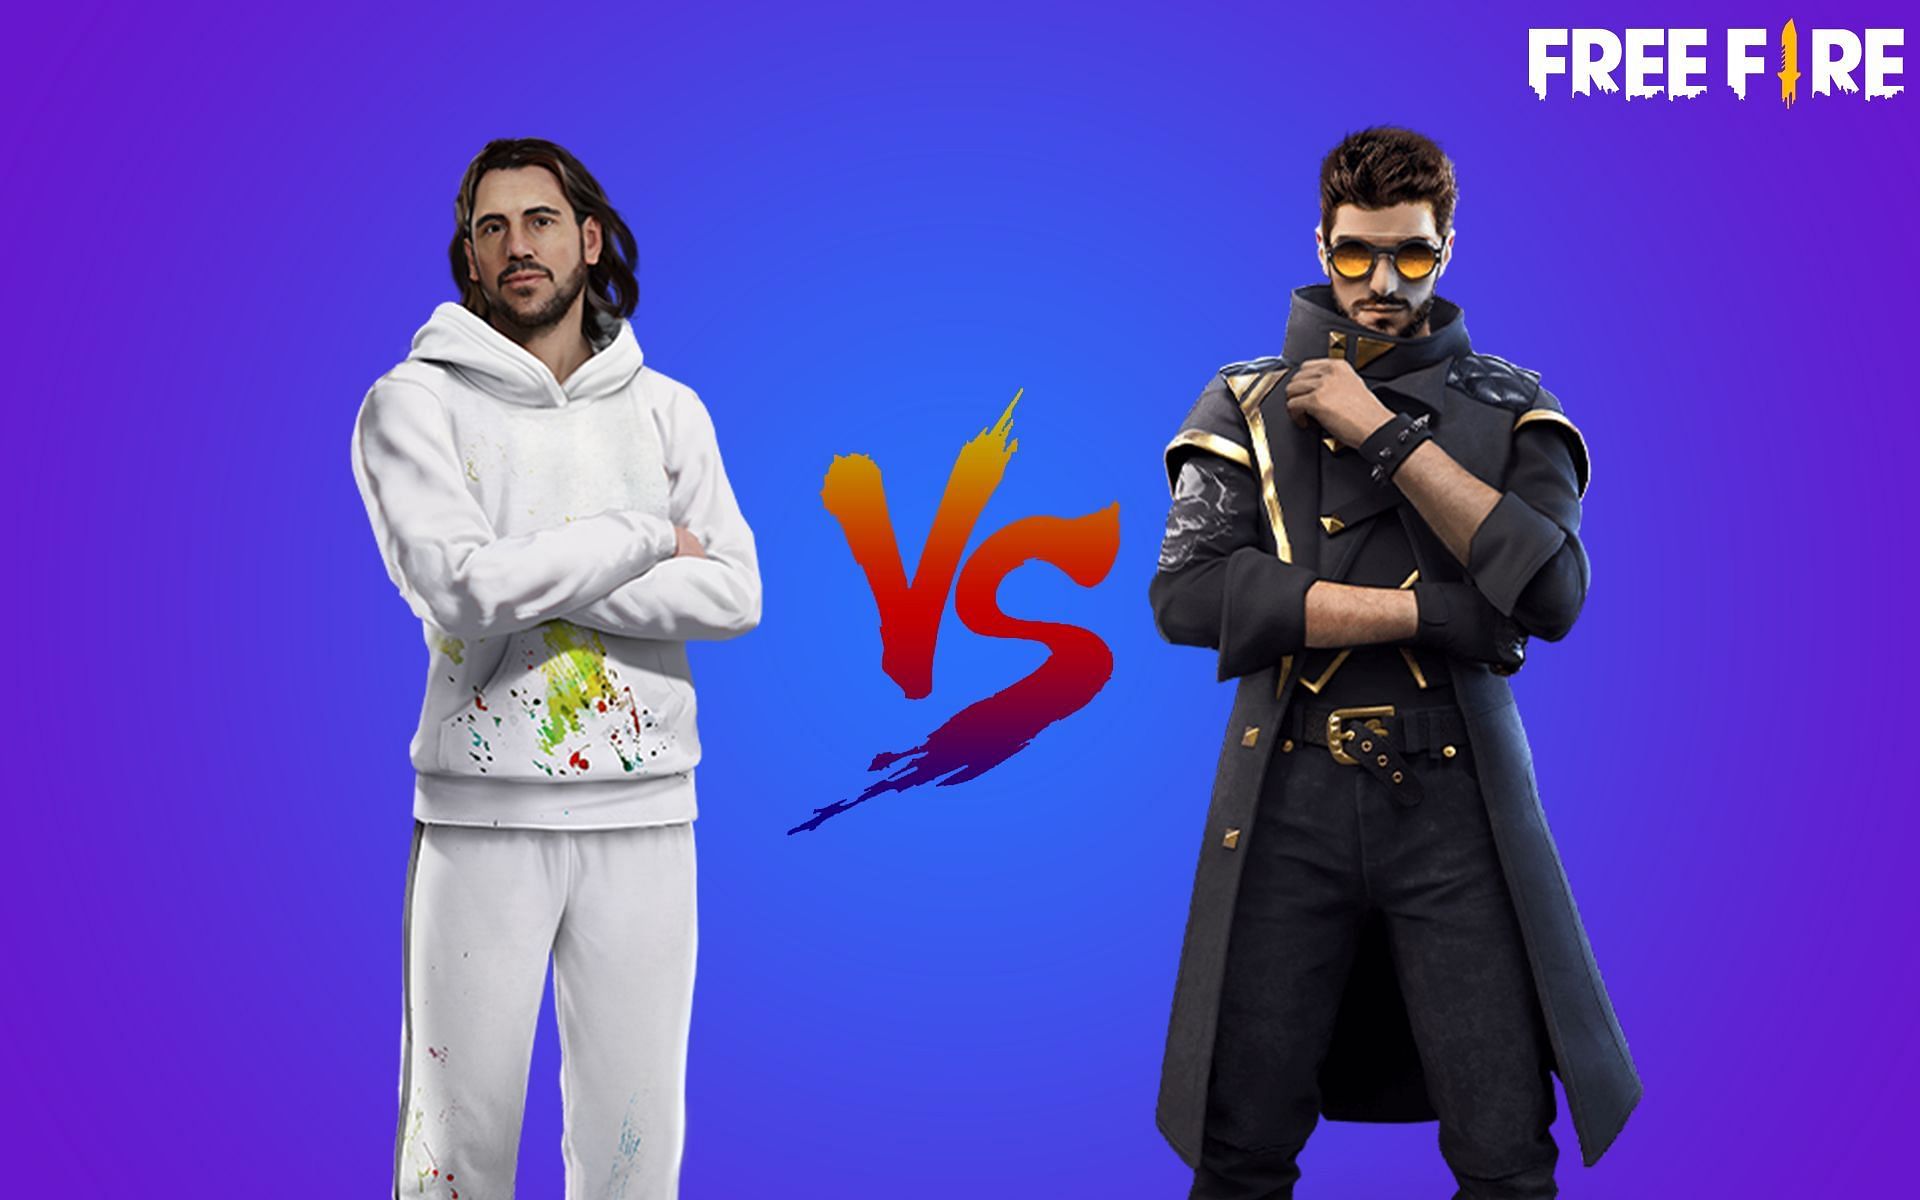 Both of these Free Fire characters offer powerful in-game bonuses (Image via Sportskeeda)